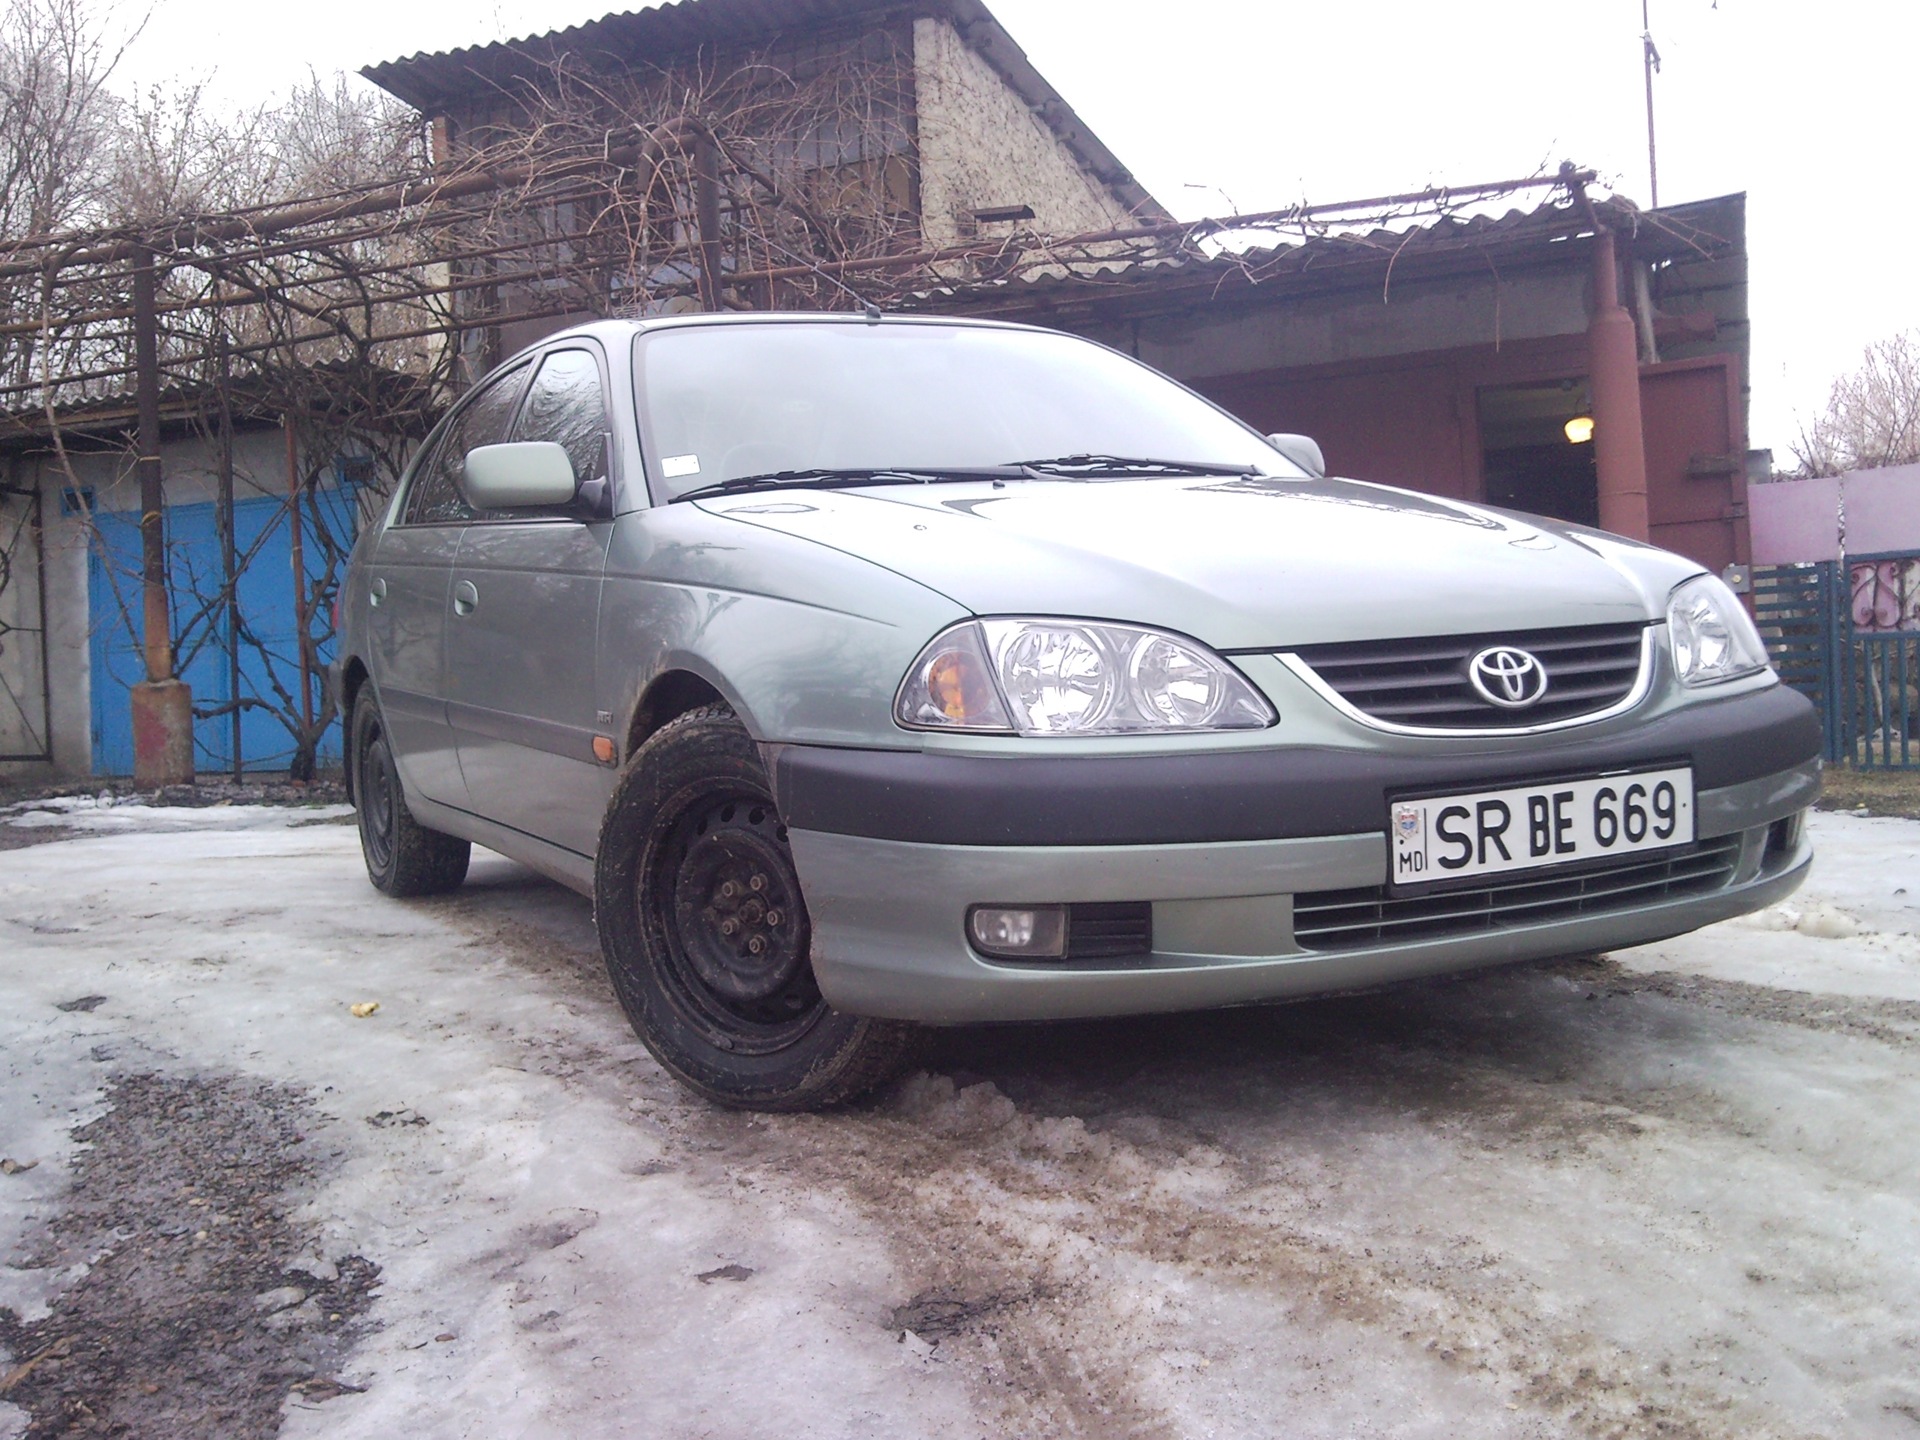 She was like this before the re-registration and styling - Toyota Avensis 18 liter 2002